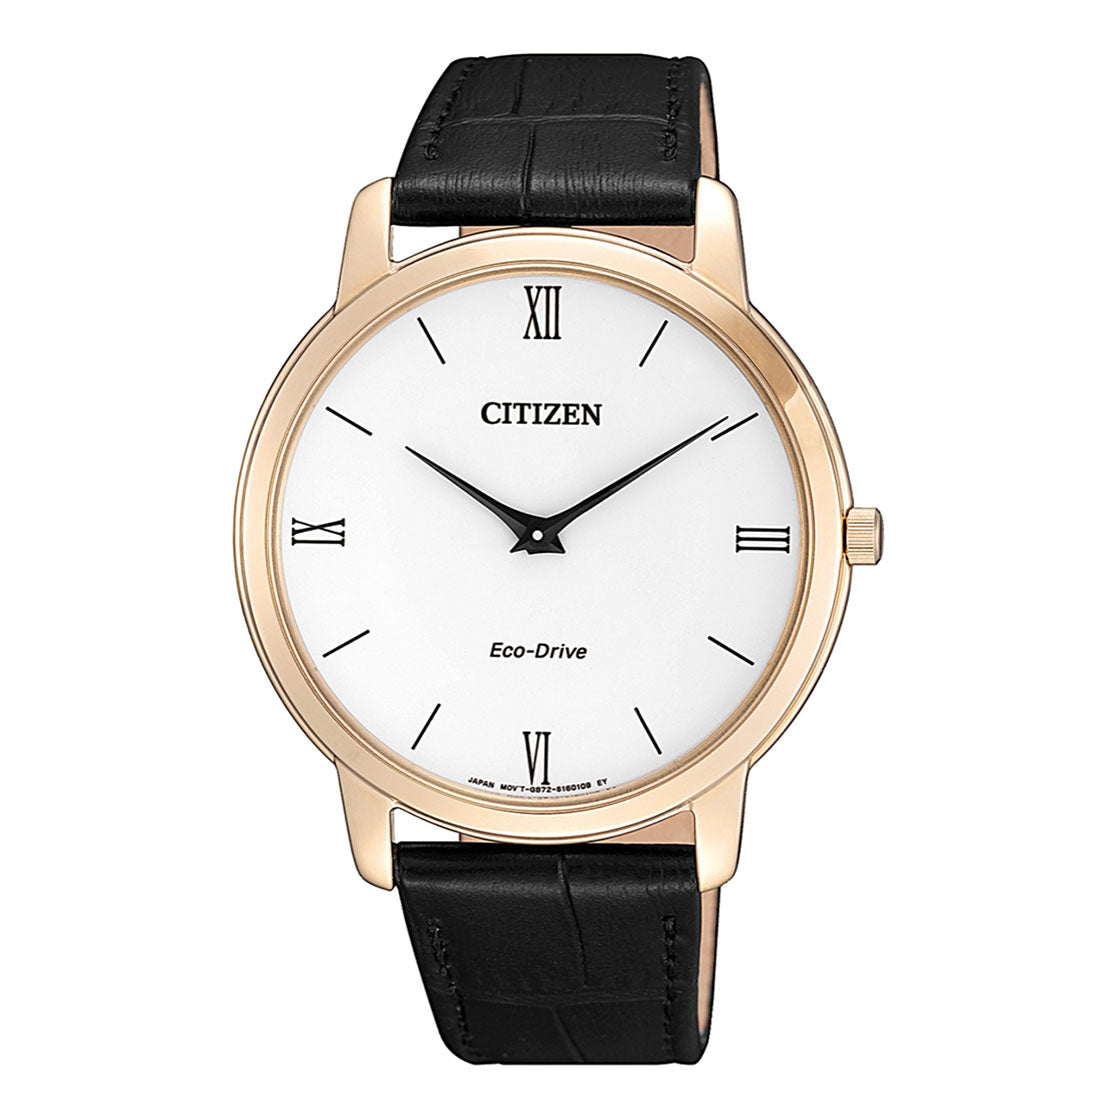 CITIZEN ECO-DRIVE GENTS WATCH WHITE DIAL - AR1133-23A